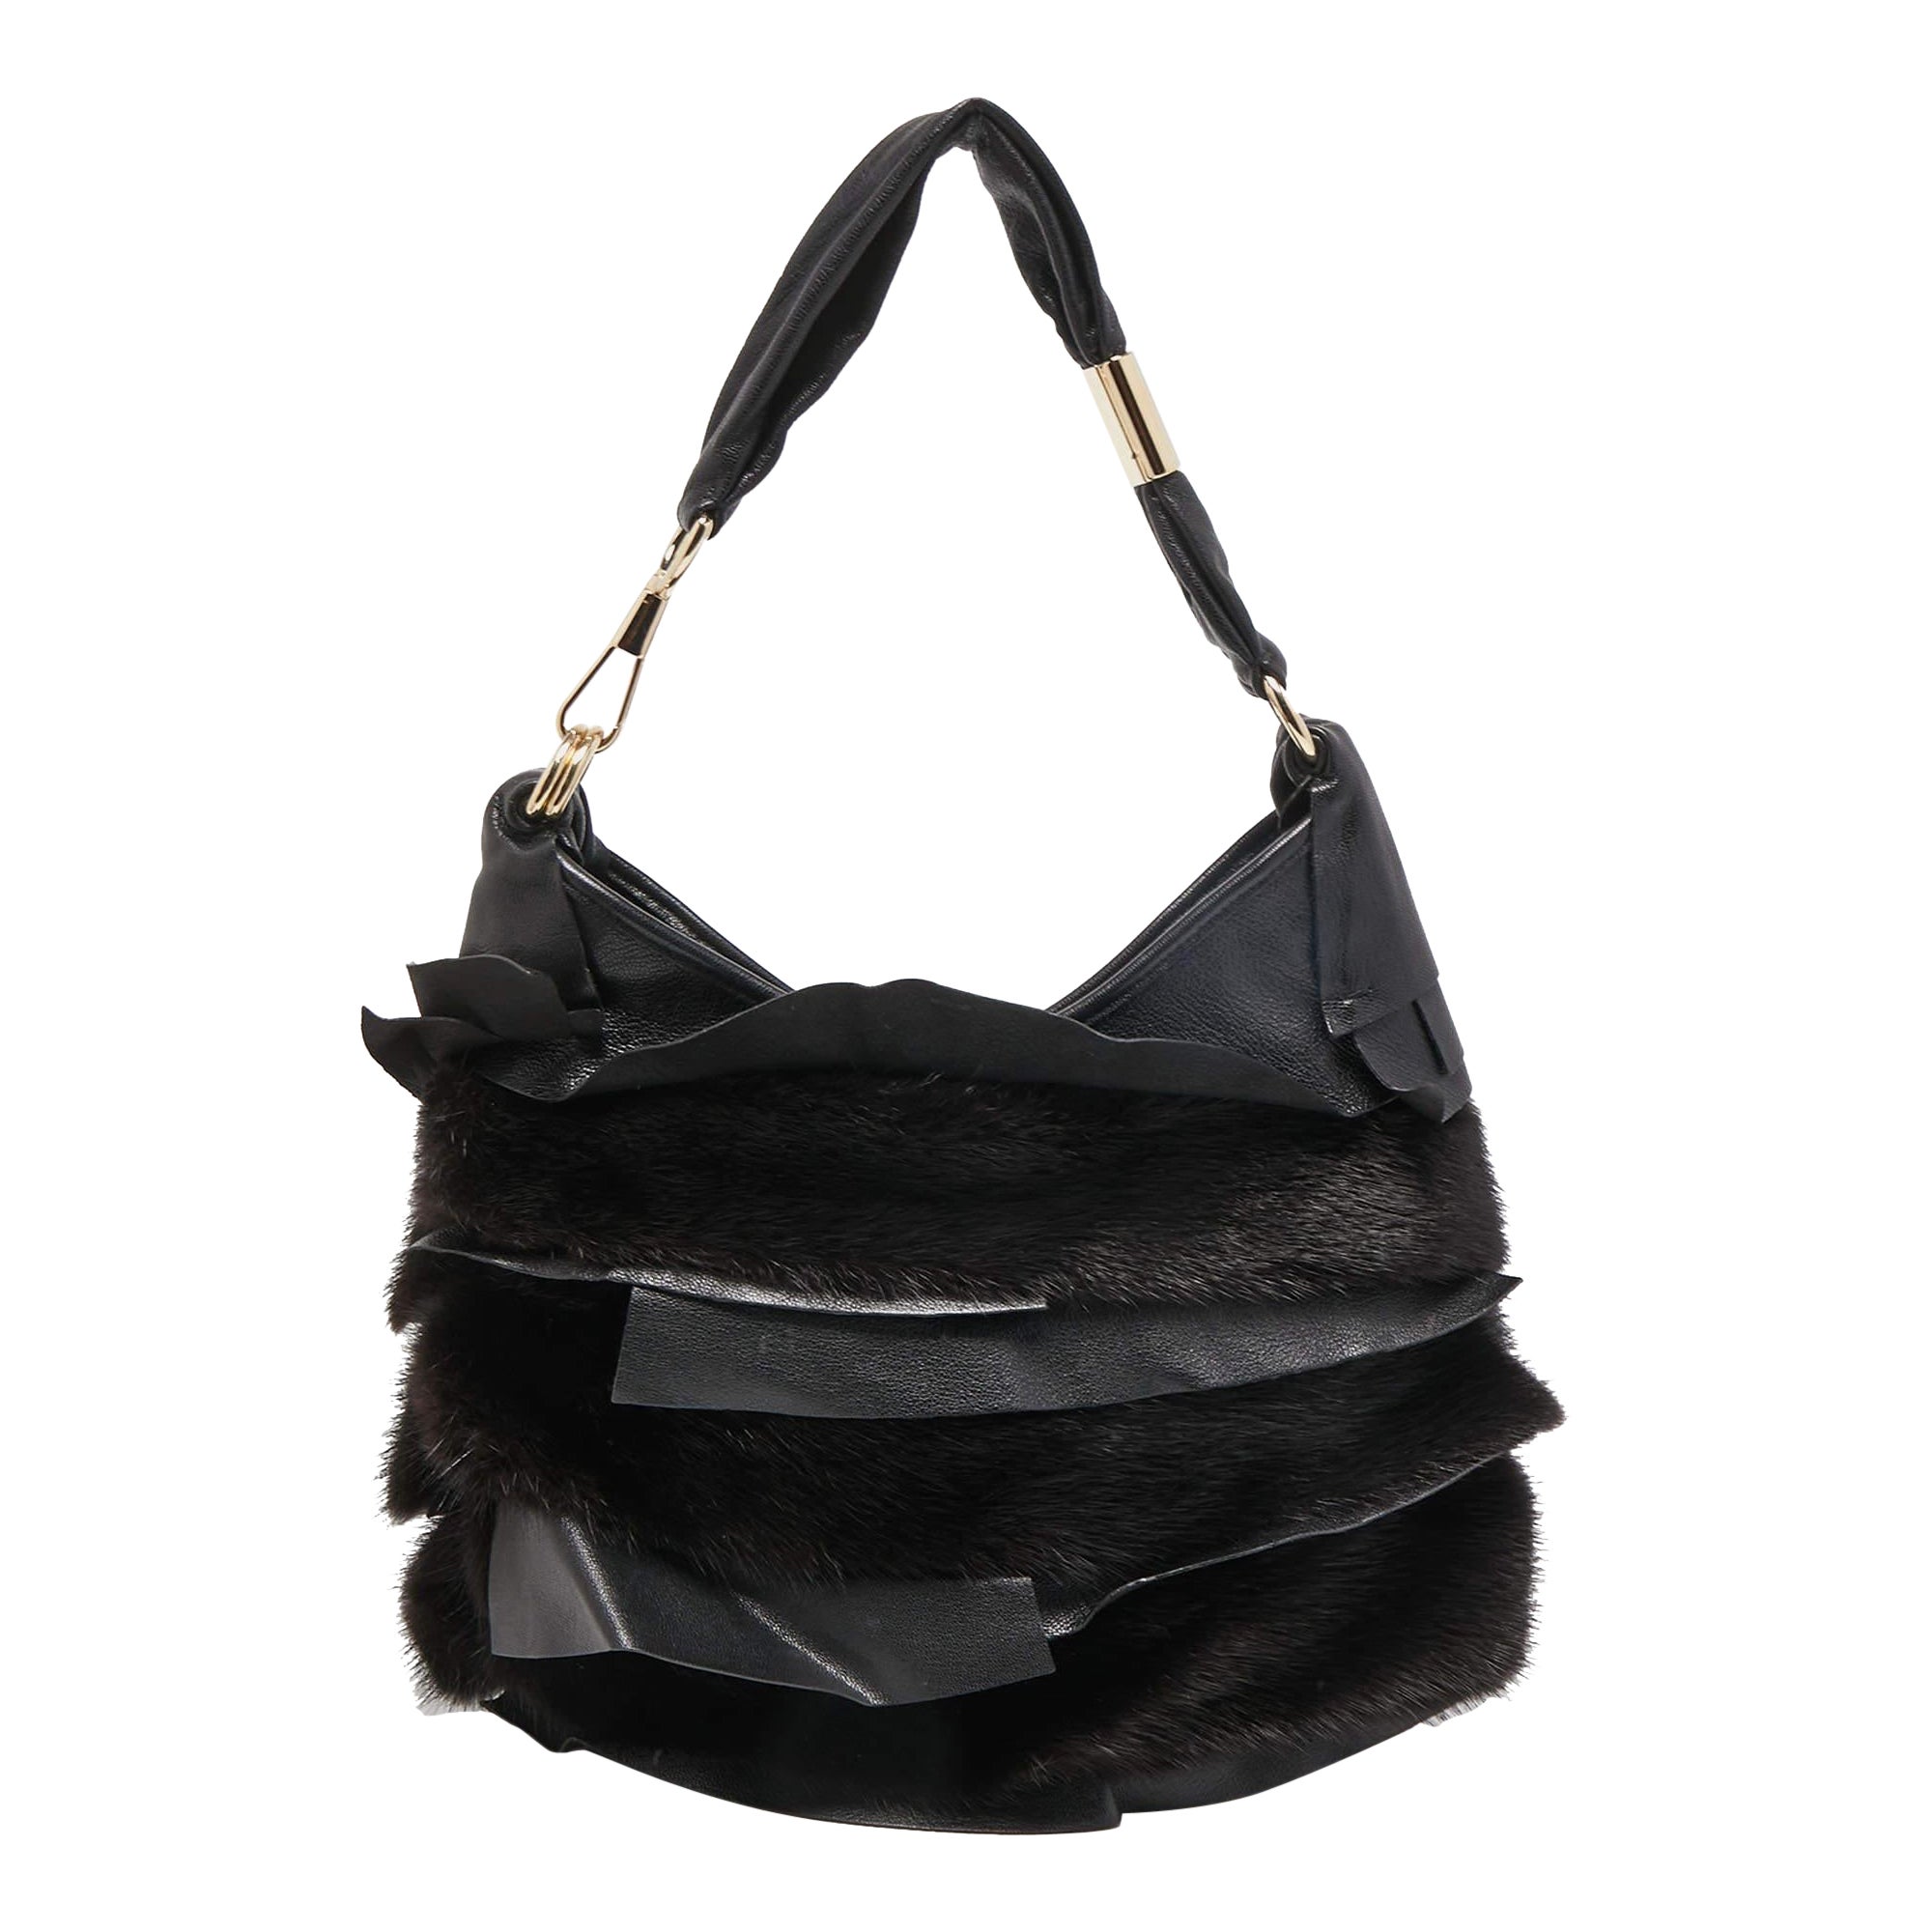 Yves Saint Laurent Black Leather and Calfhair Small St Tropez Hobo